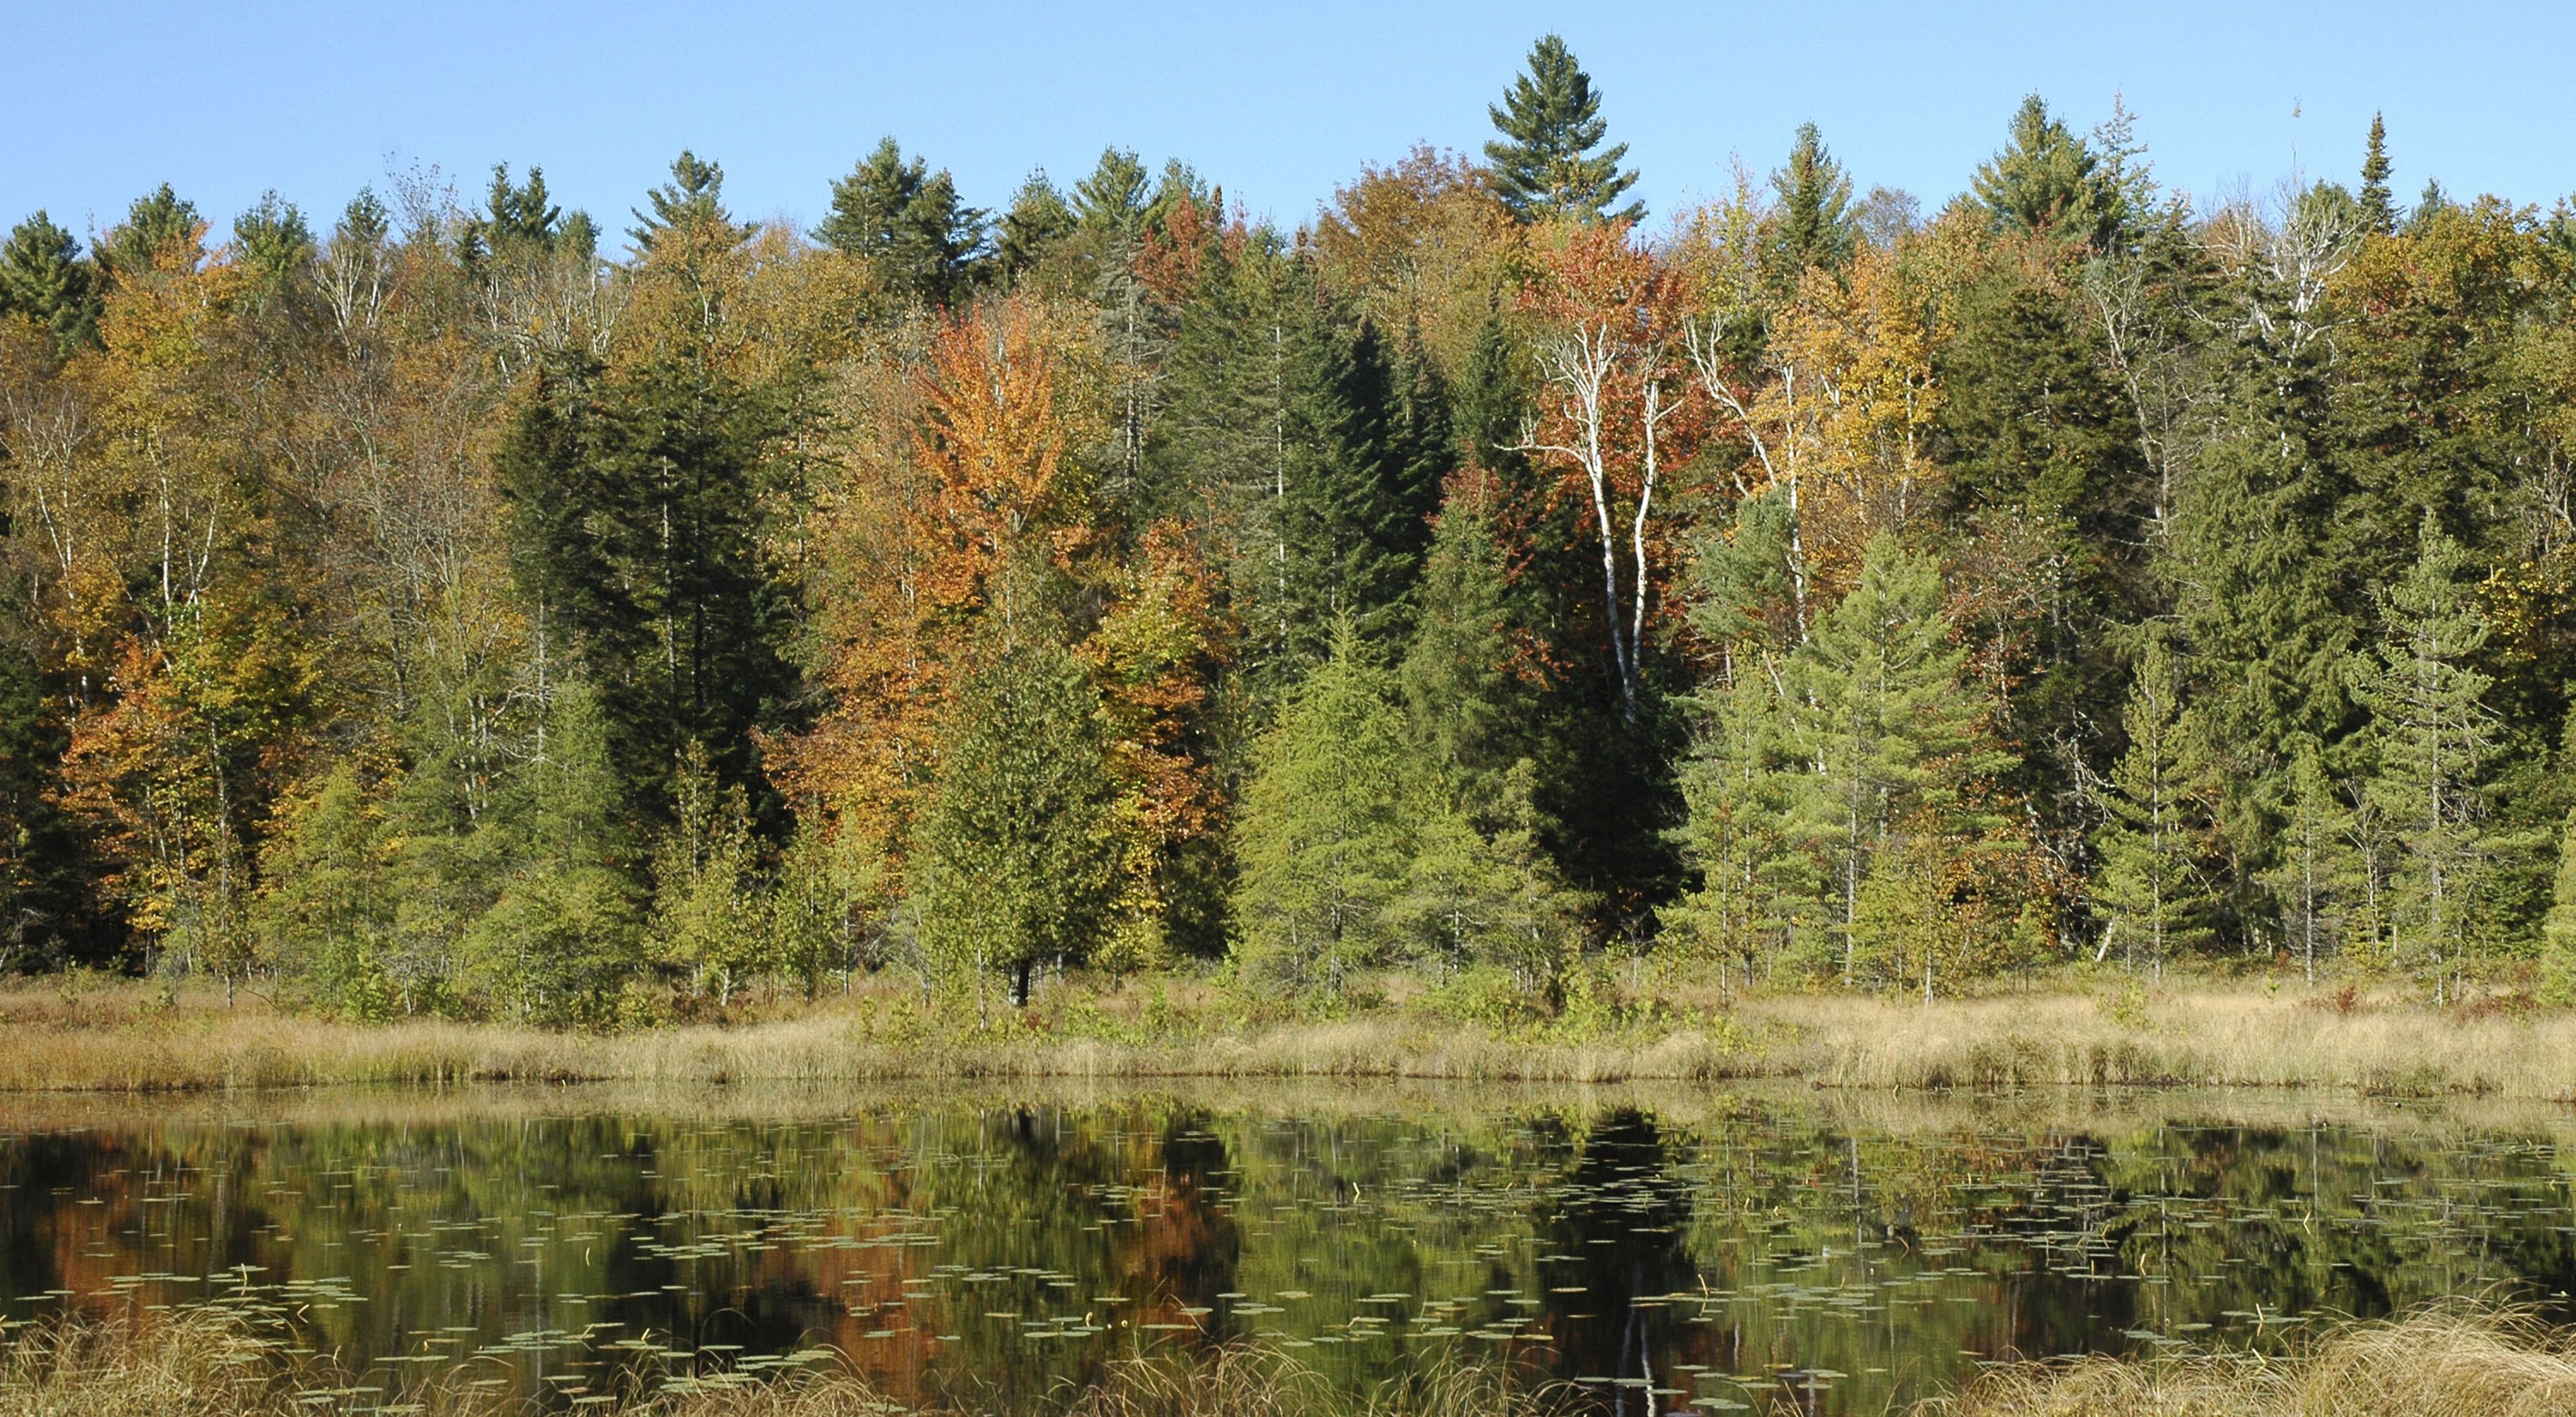 A pond in the foreground with dense forest along the far bank.